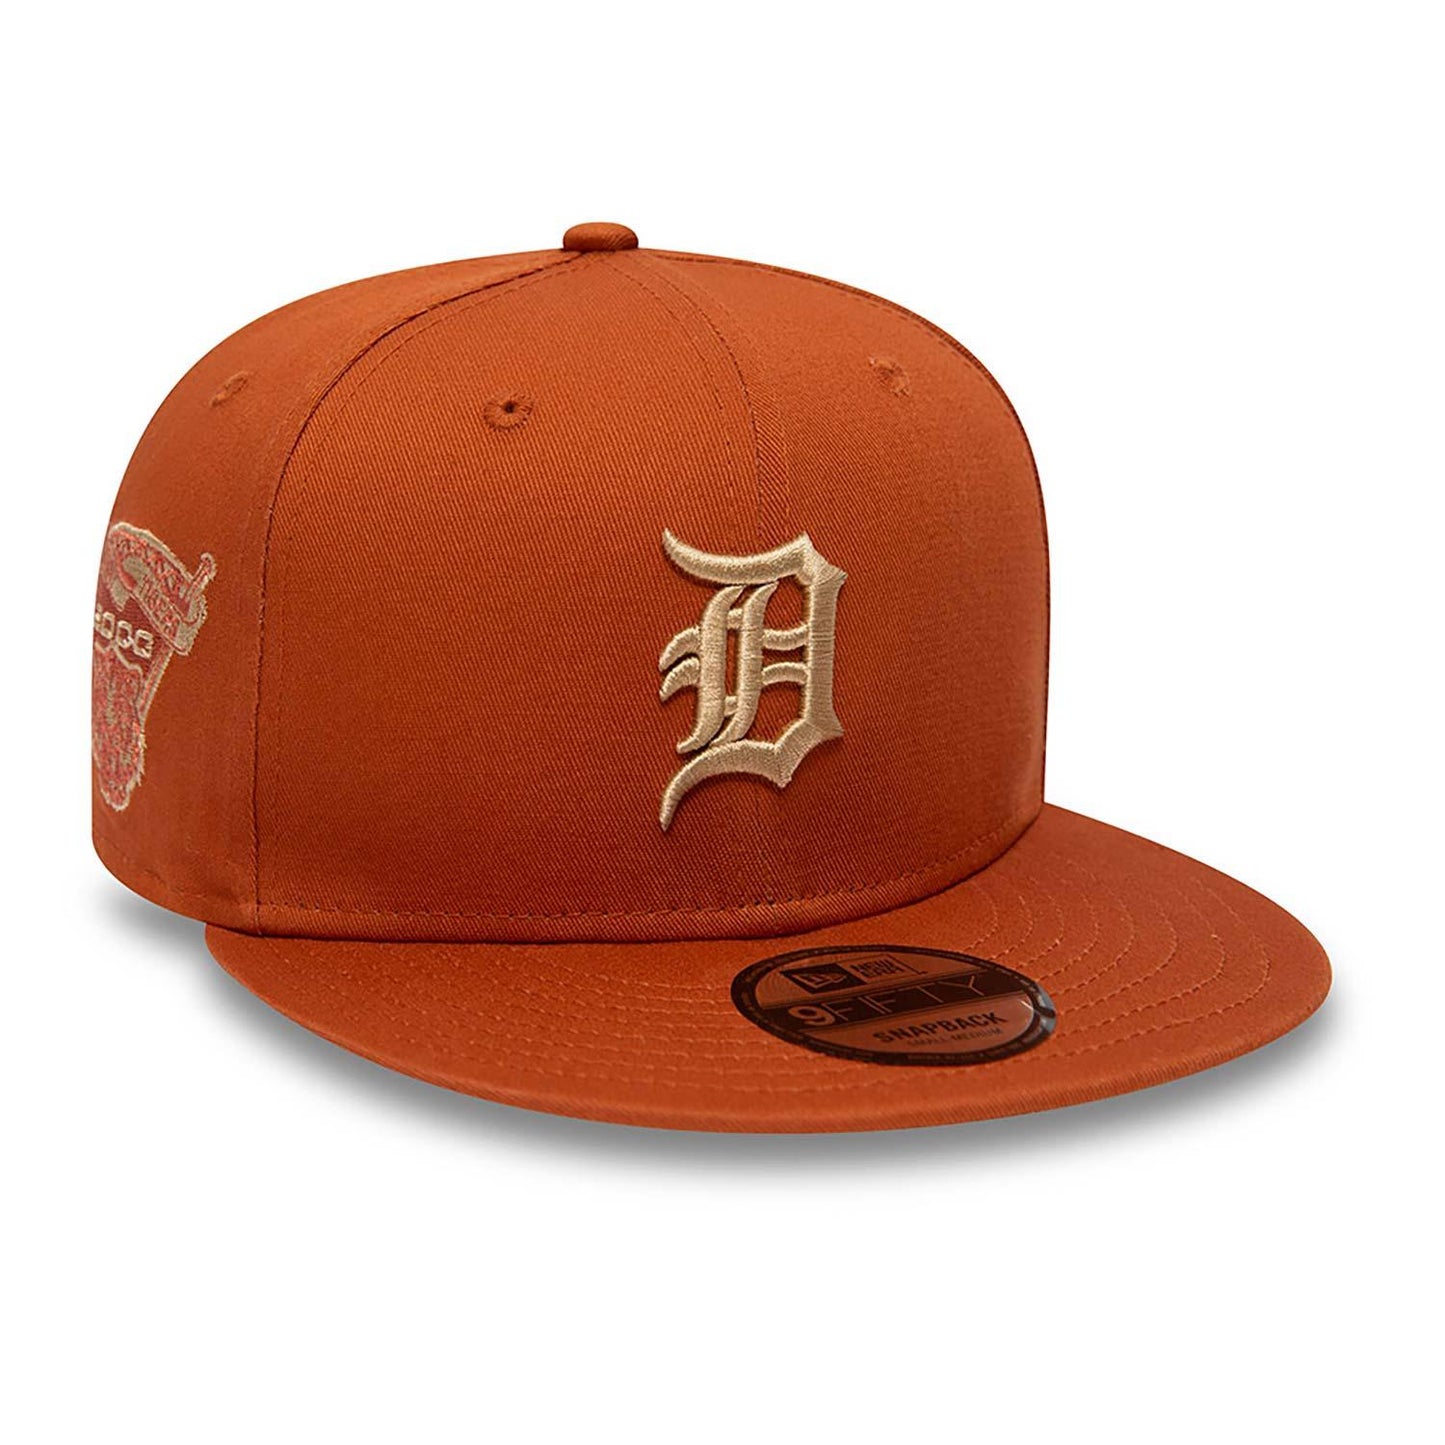 NEW ERA 9FIFTY SIDE PATCH DETROIT TIGERS RUST SNAPBACK